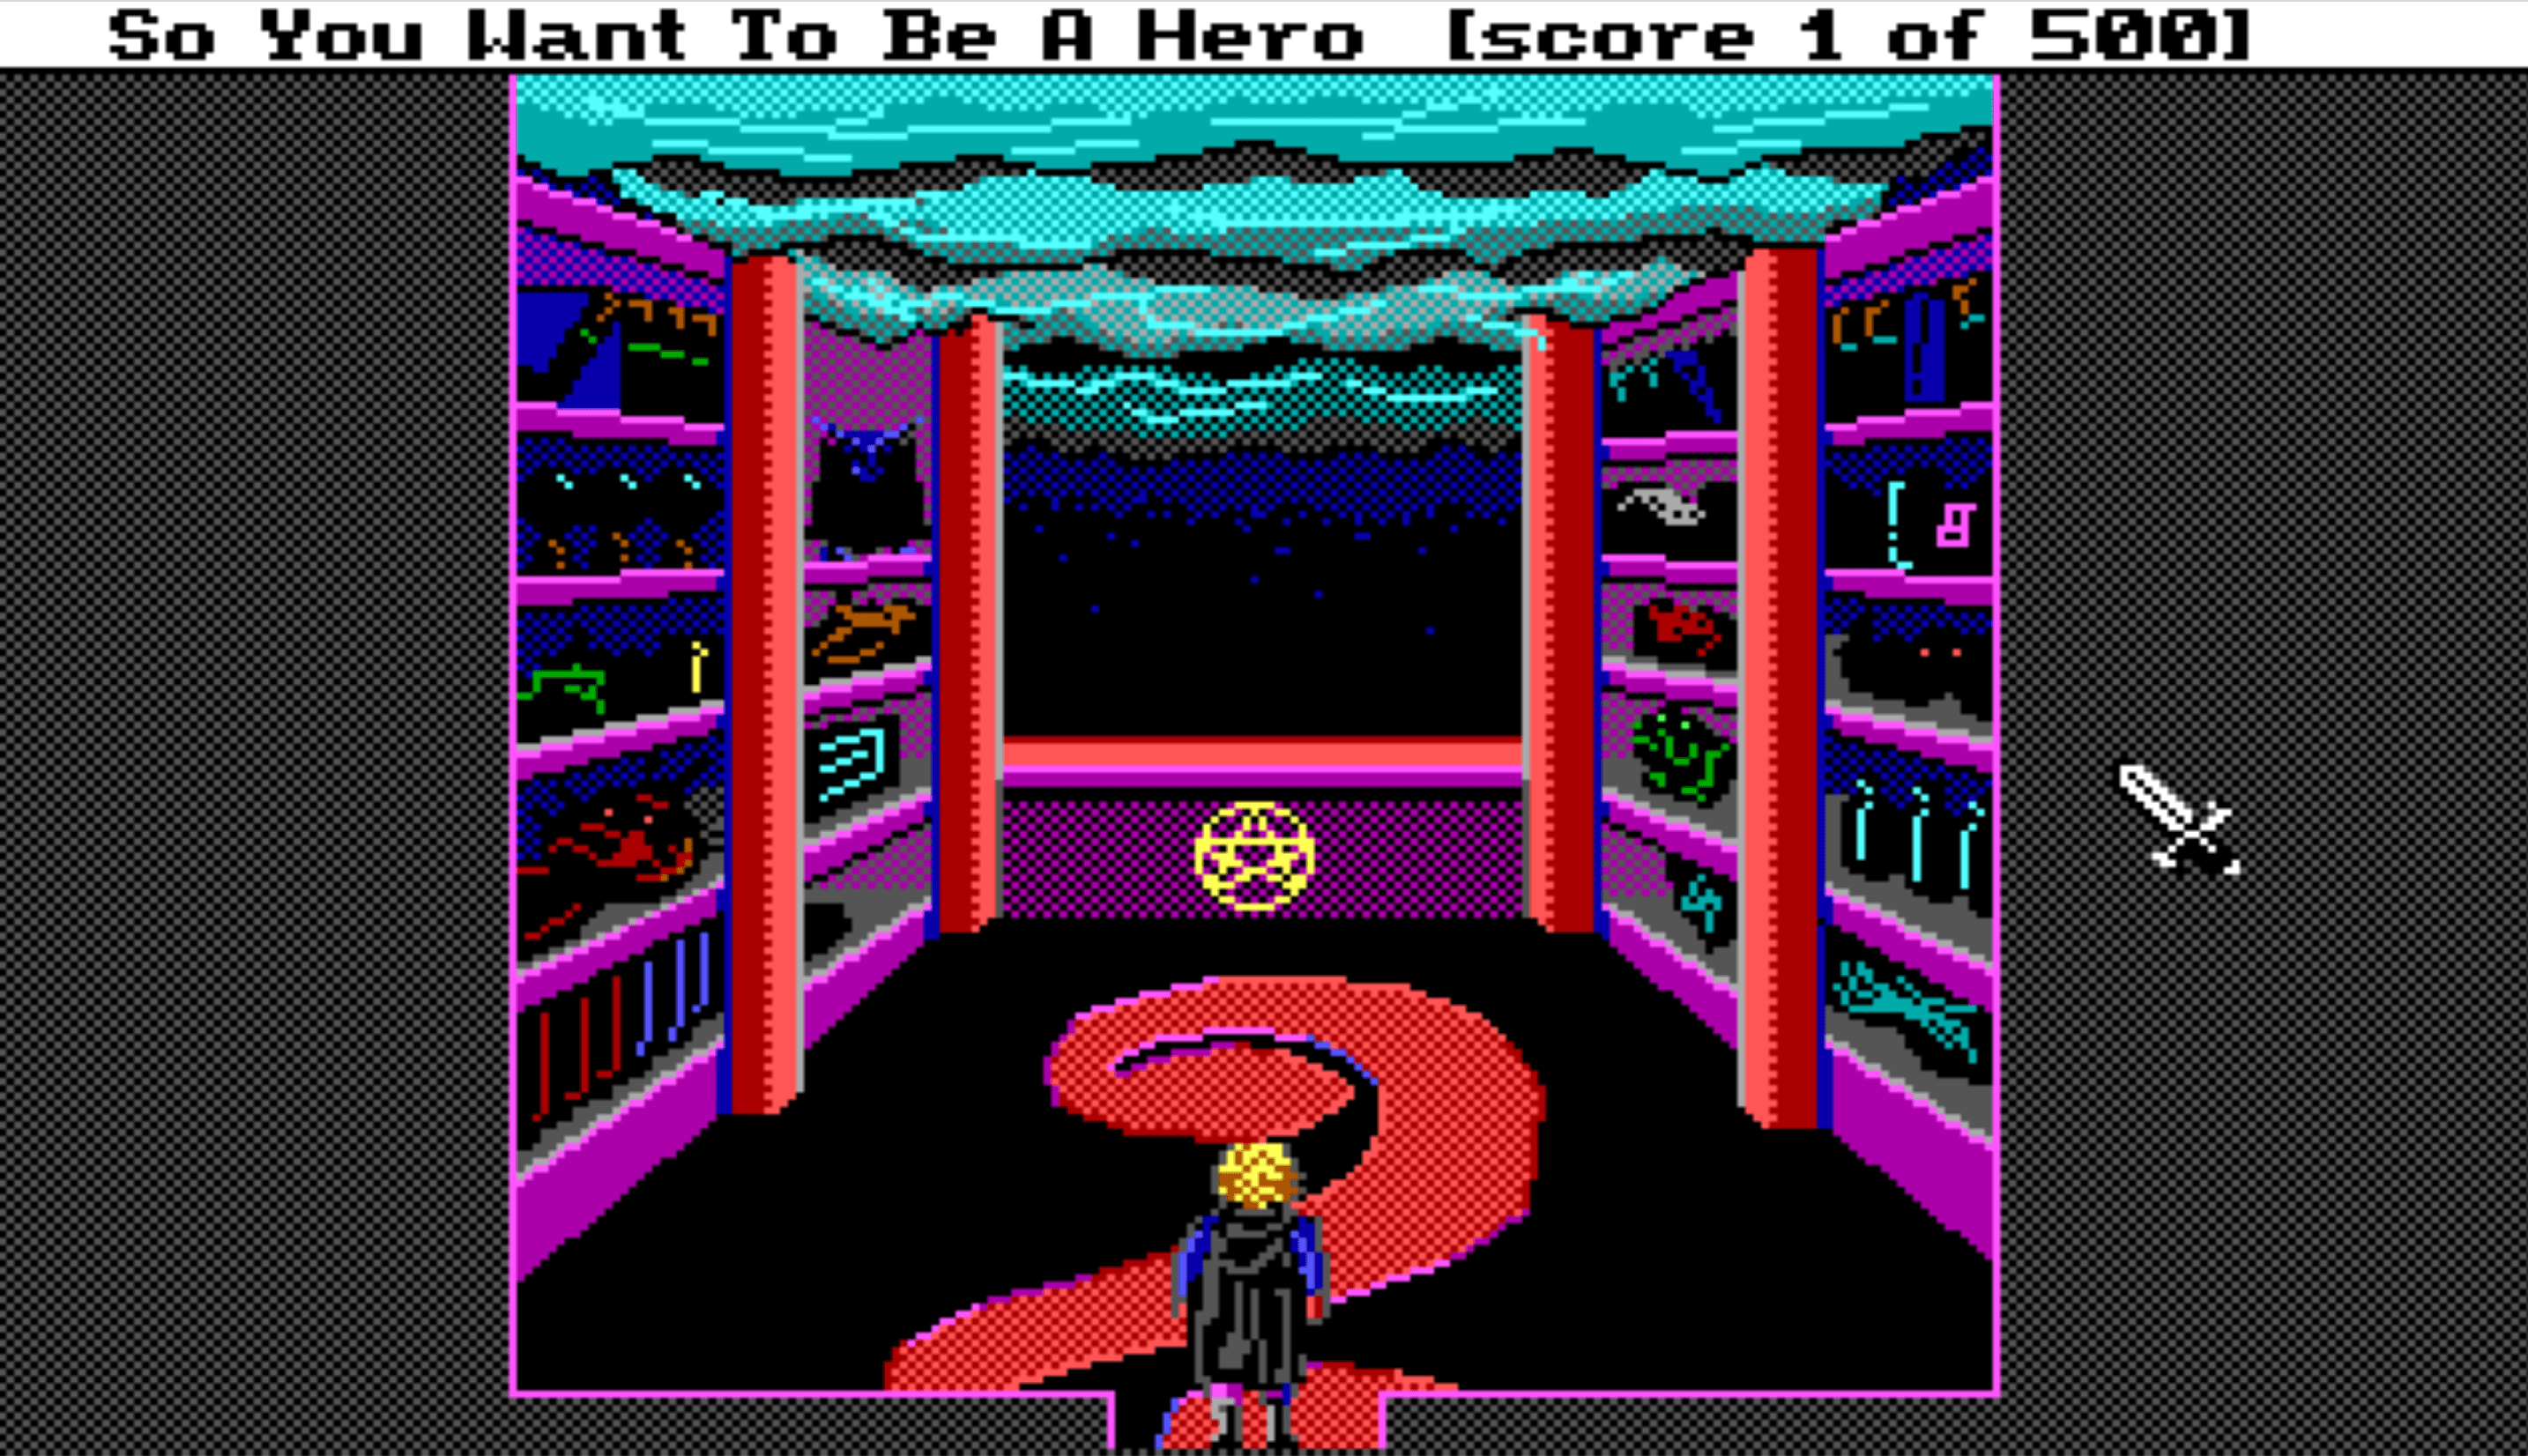 Quest for Glory 1: So you want to be a Hero (AKA Hero's Quest)